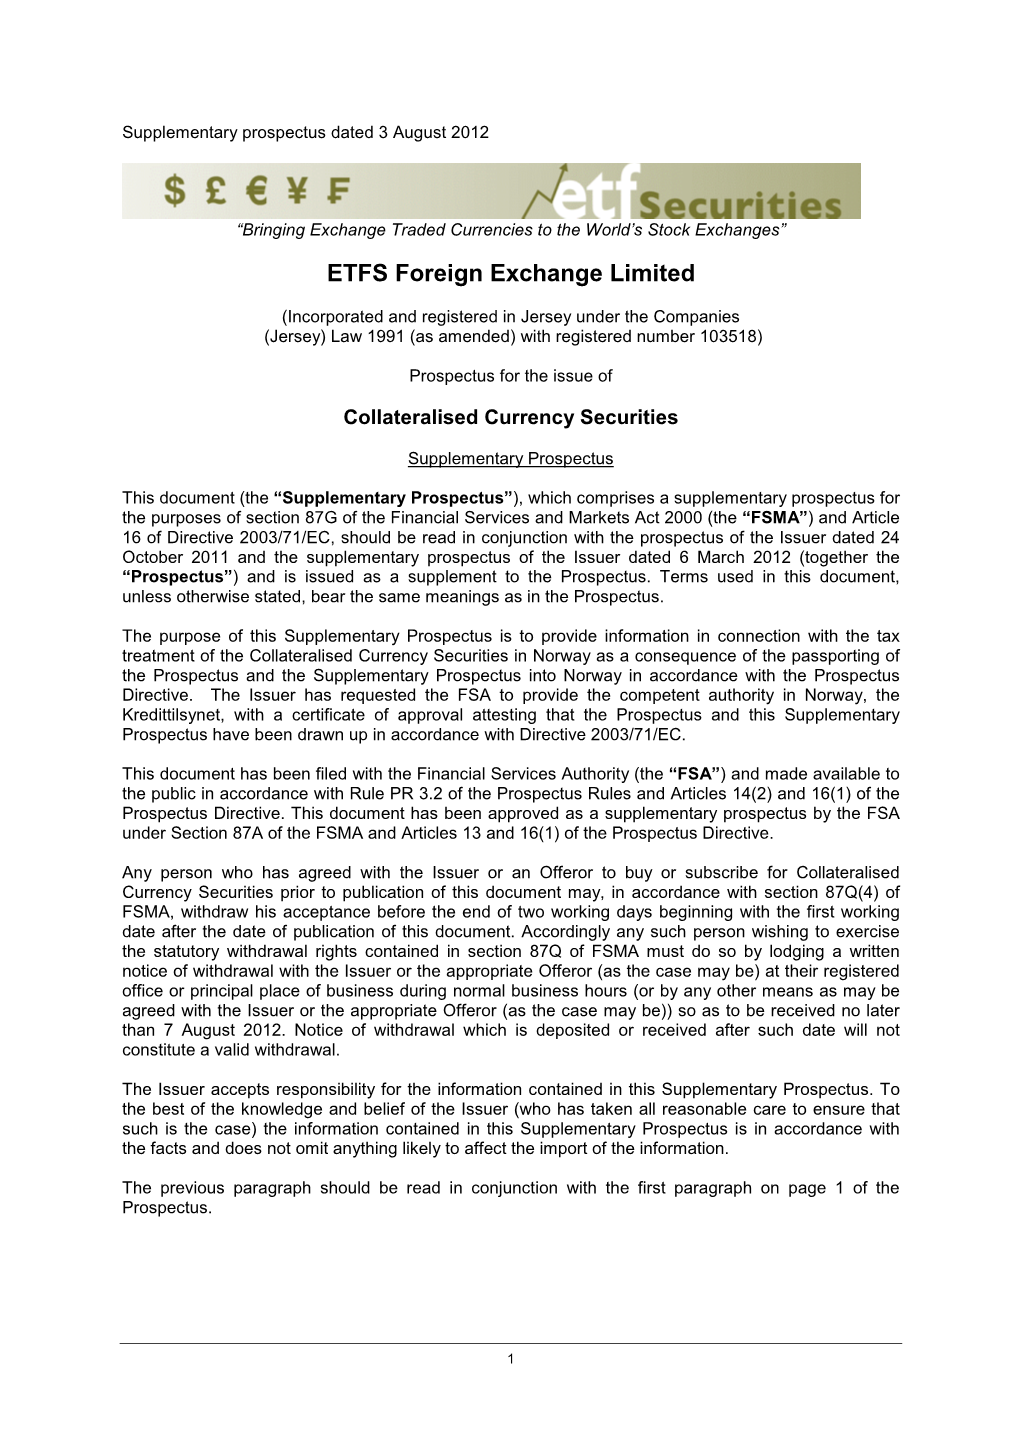 ETFS Foreign Exchange Limited